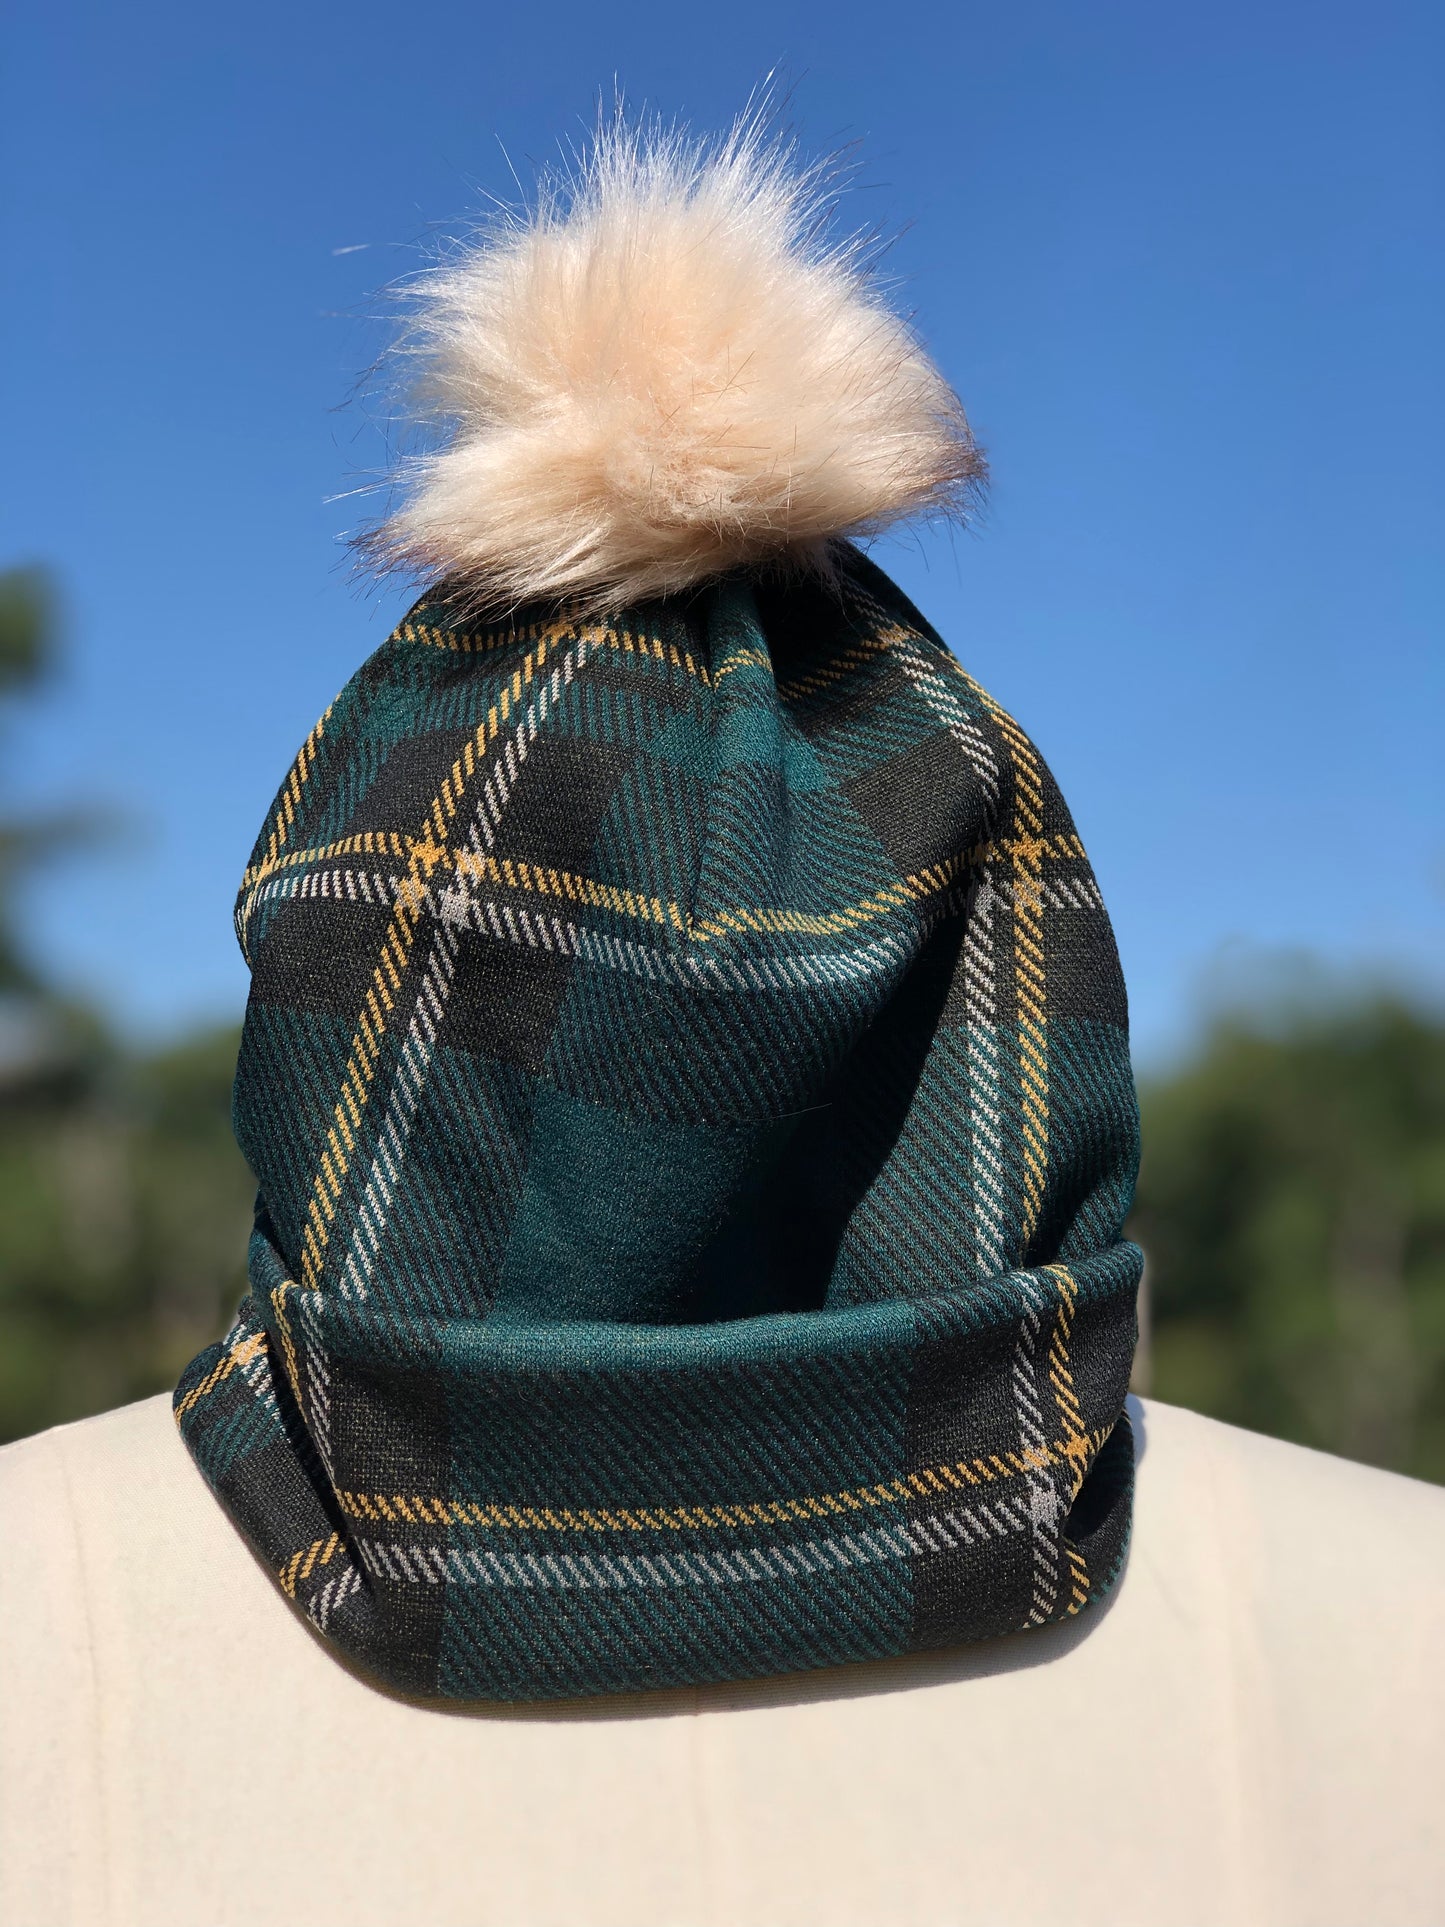 Green, Gold and Black Plaid Winter Beanie With or Without Pom Pom - Limited Stock